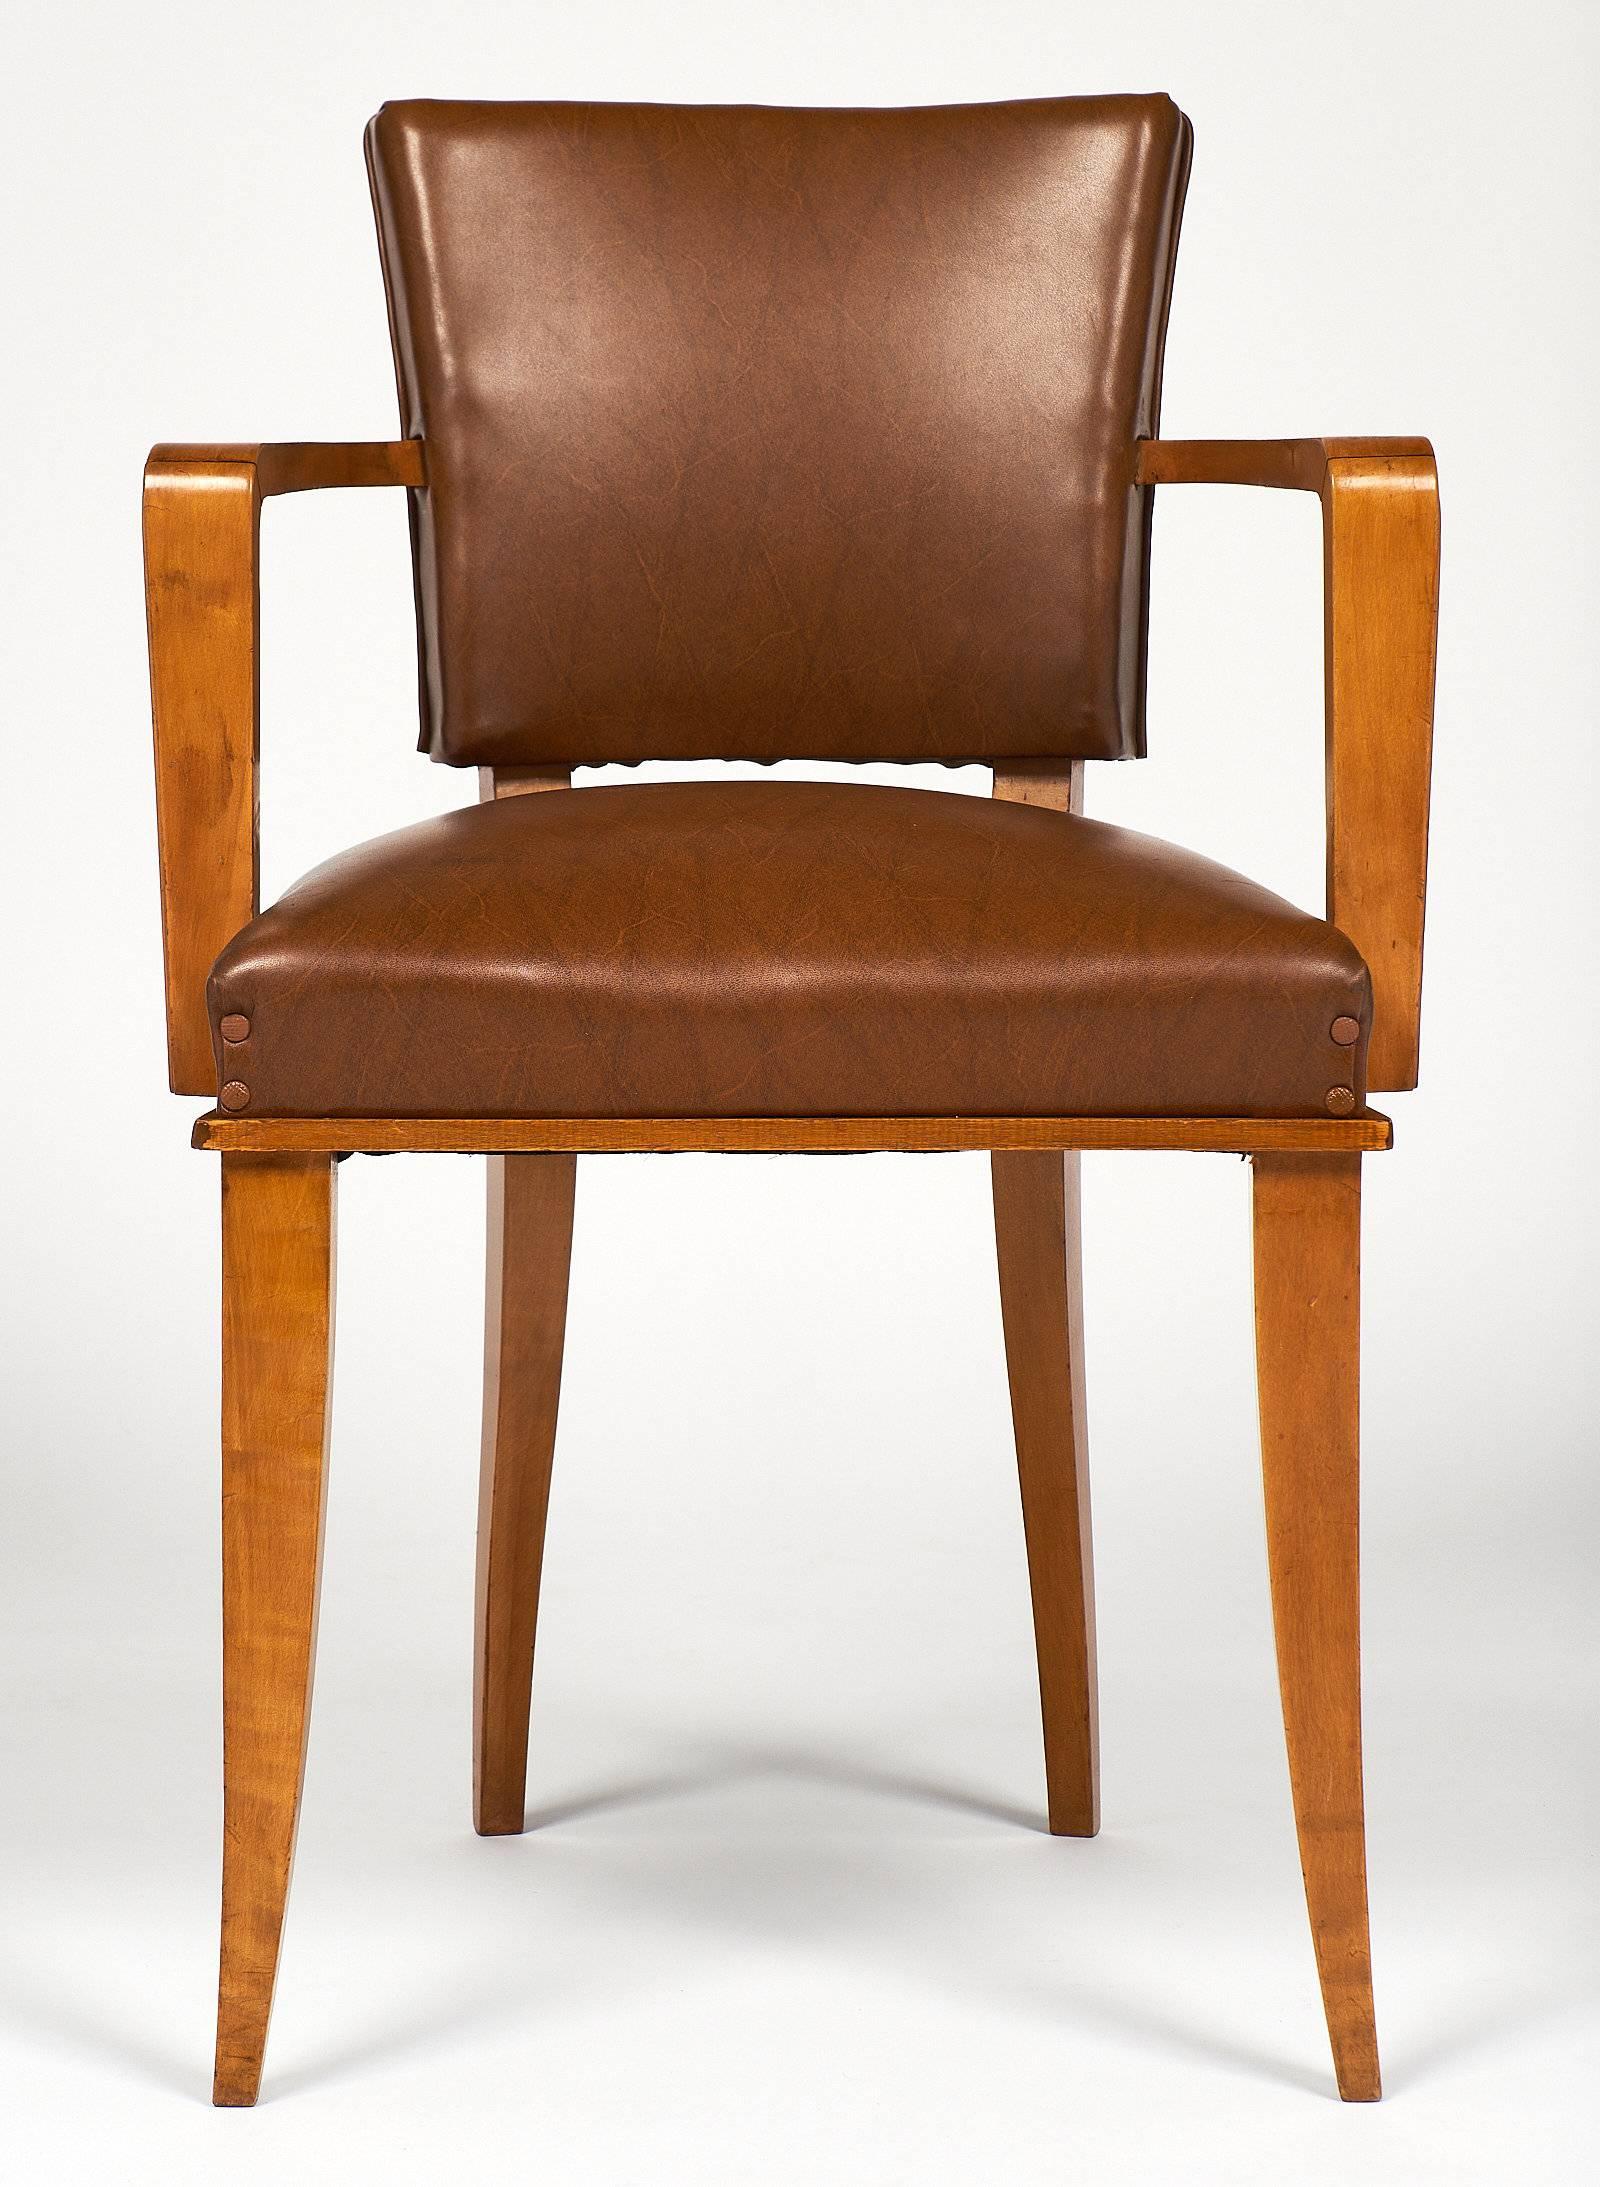 Set of four Art Deco French bridge chairs with a lustrous French polish finish. The wood is all cherrywood, and they are upholstered in the original brown vinyl. These are compact, elegant, and very comfortable.